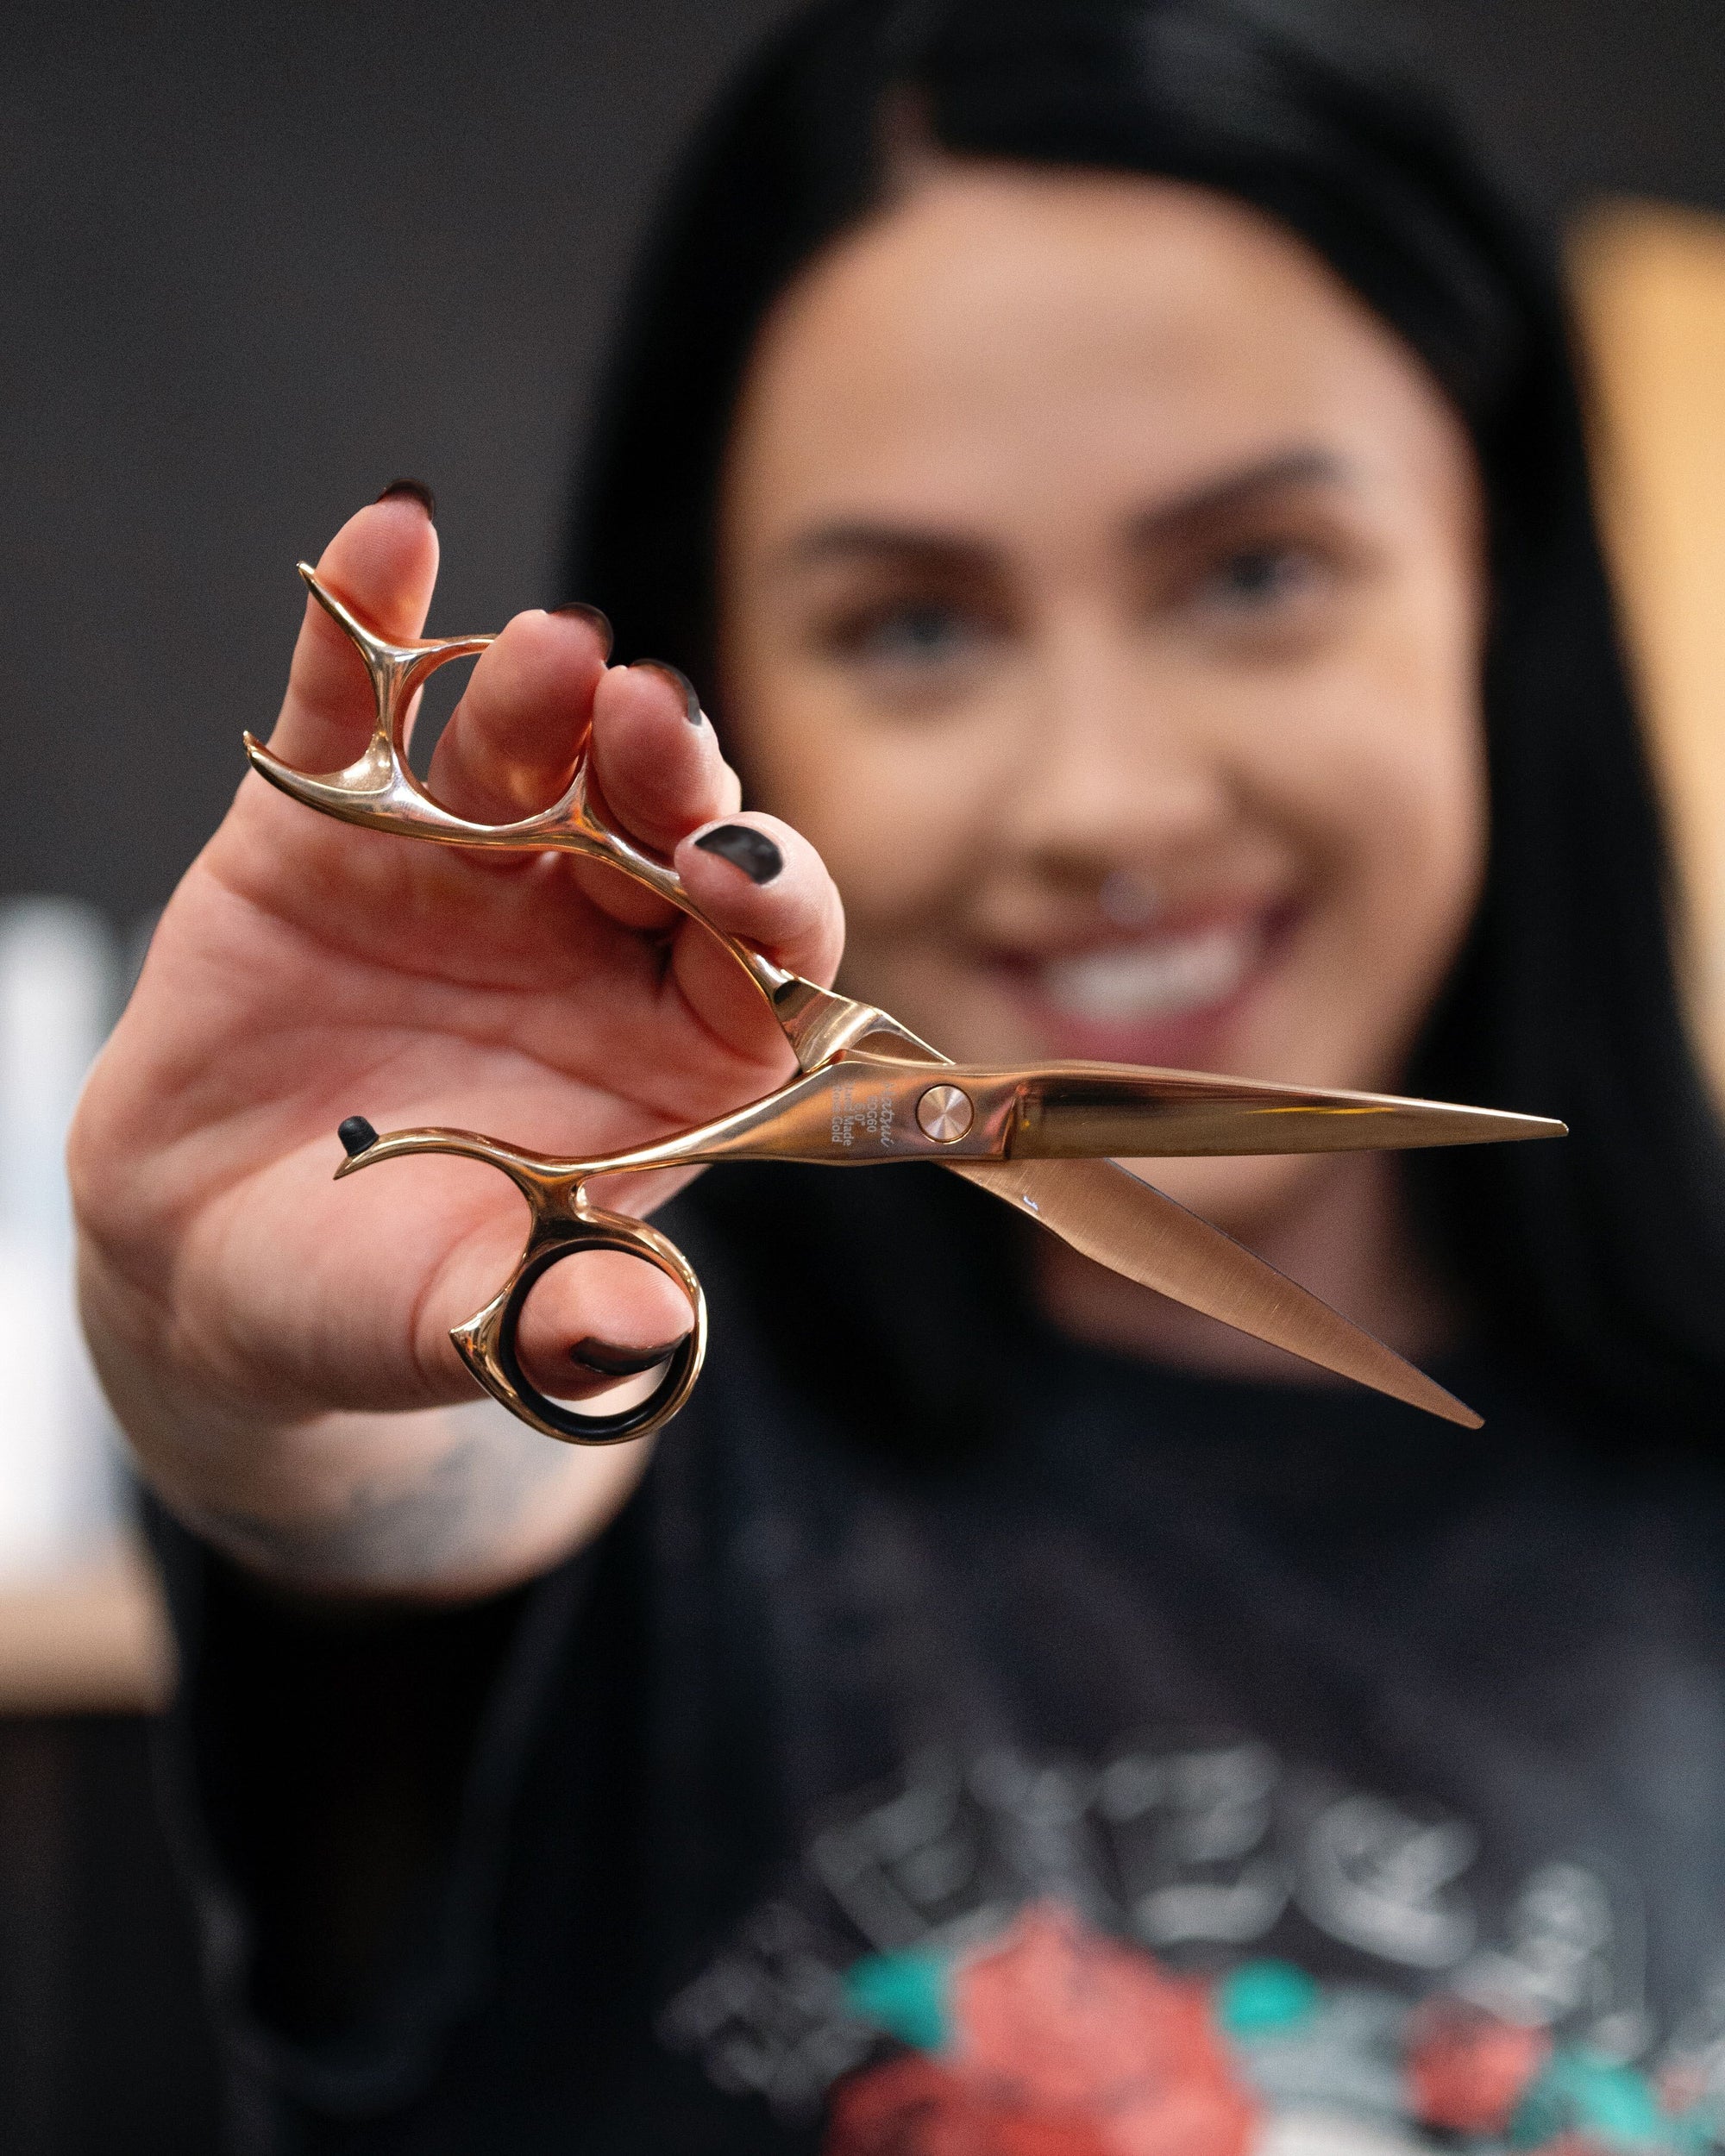 What are the most comfortable hair scissors for you?